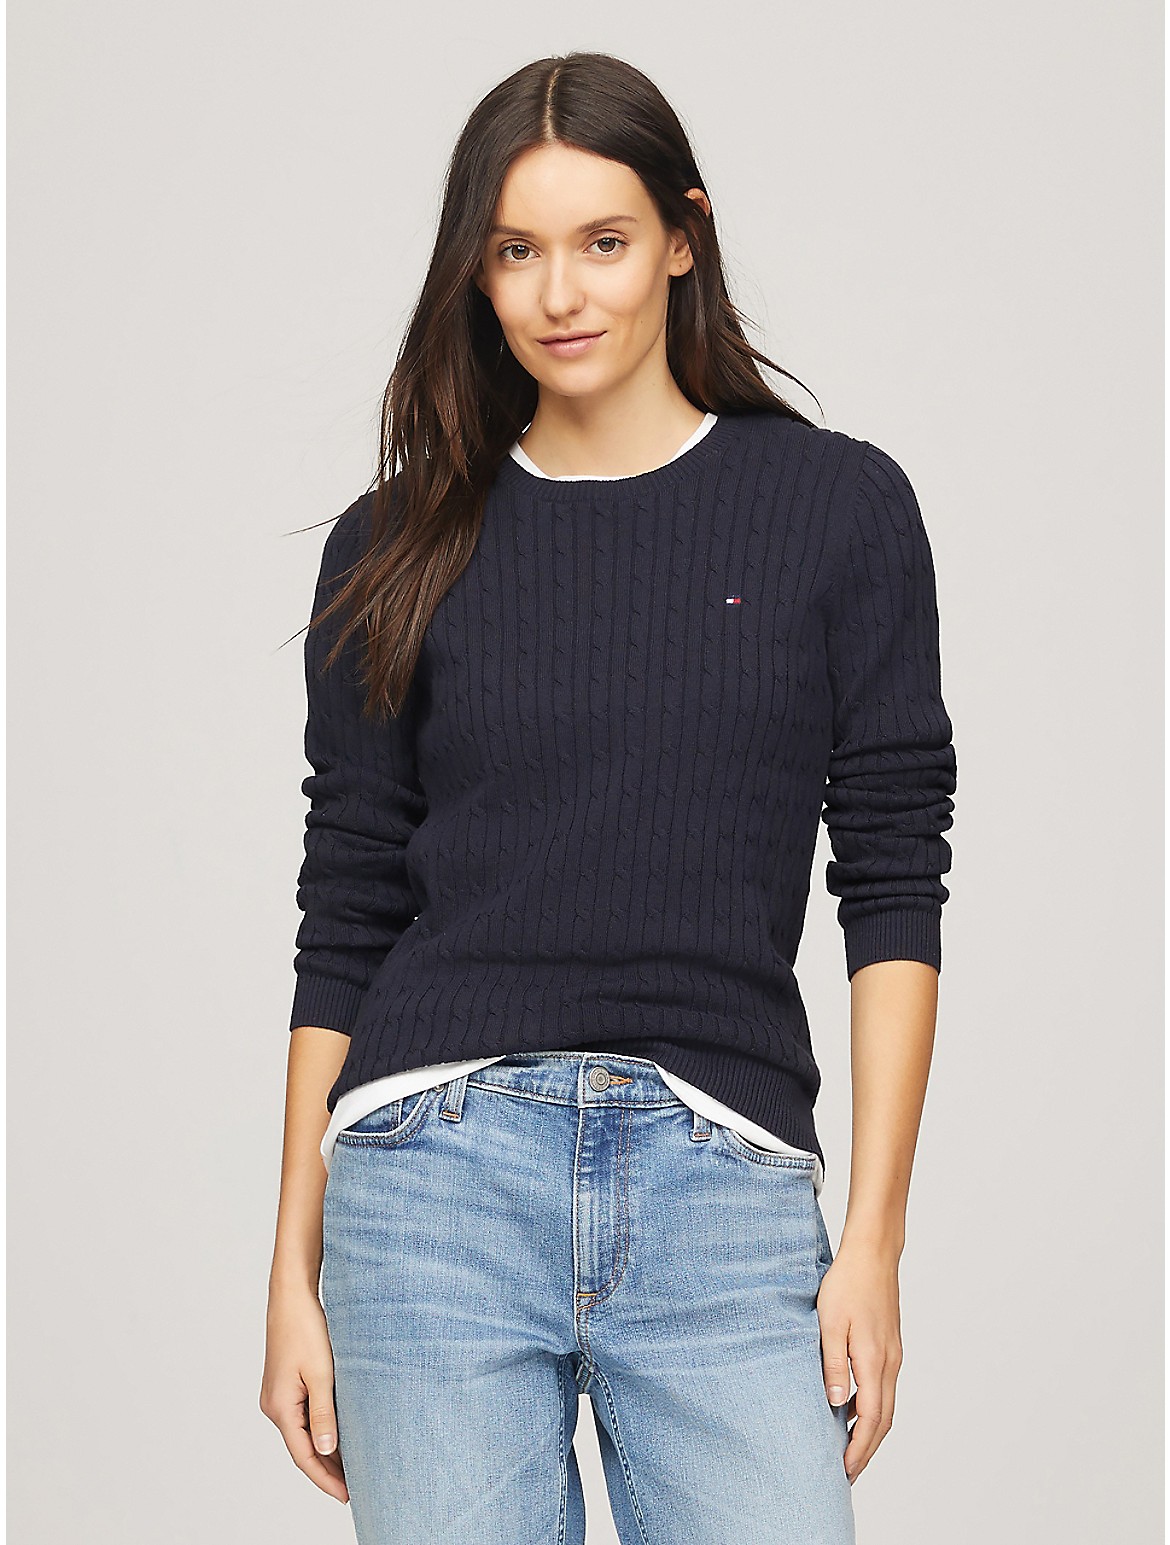 Tommy Hilfiger Women's Cable Knit Sweater